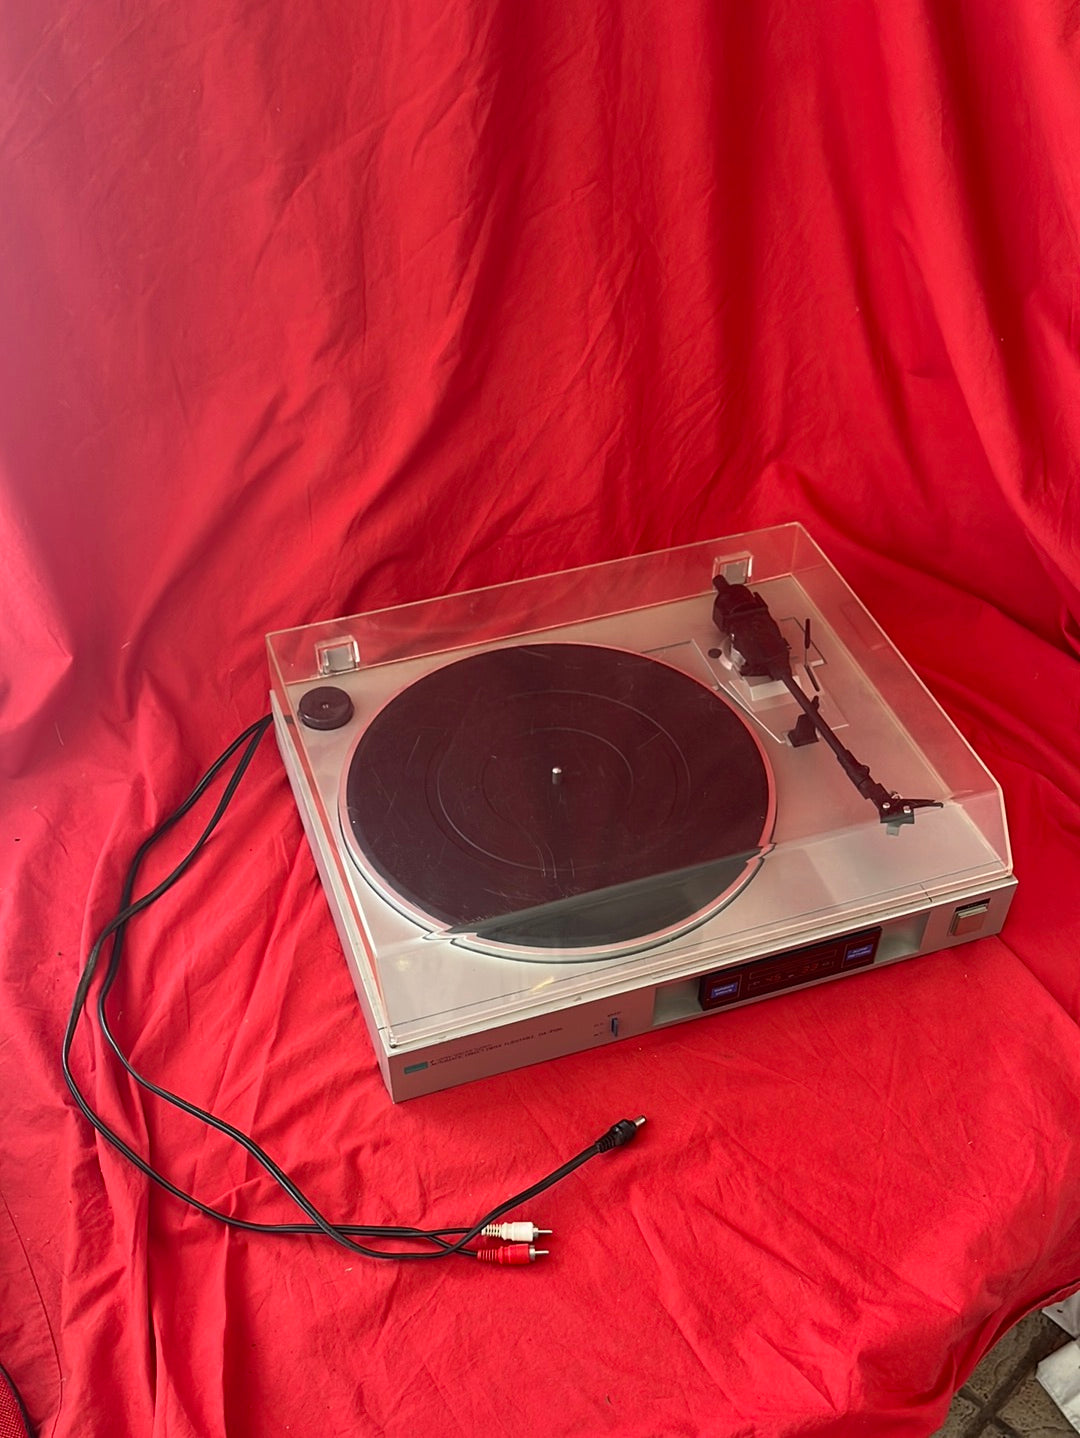 VTG -- SANSUI DA-P500 Automatic Direct Drive Turntable - Not Tested (Parts Only)